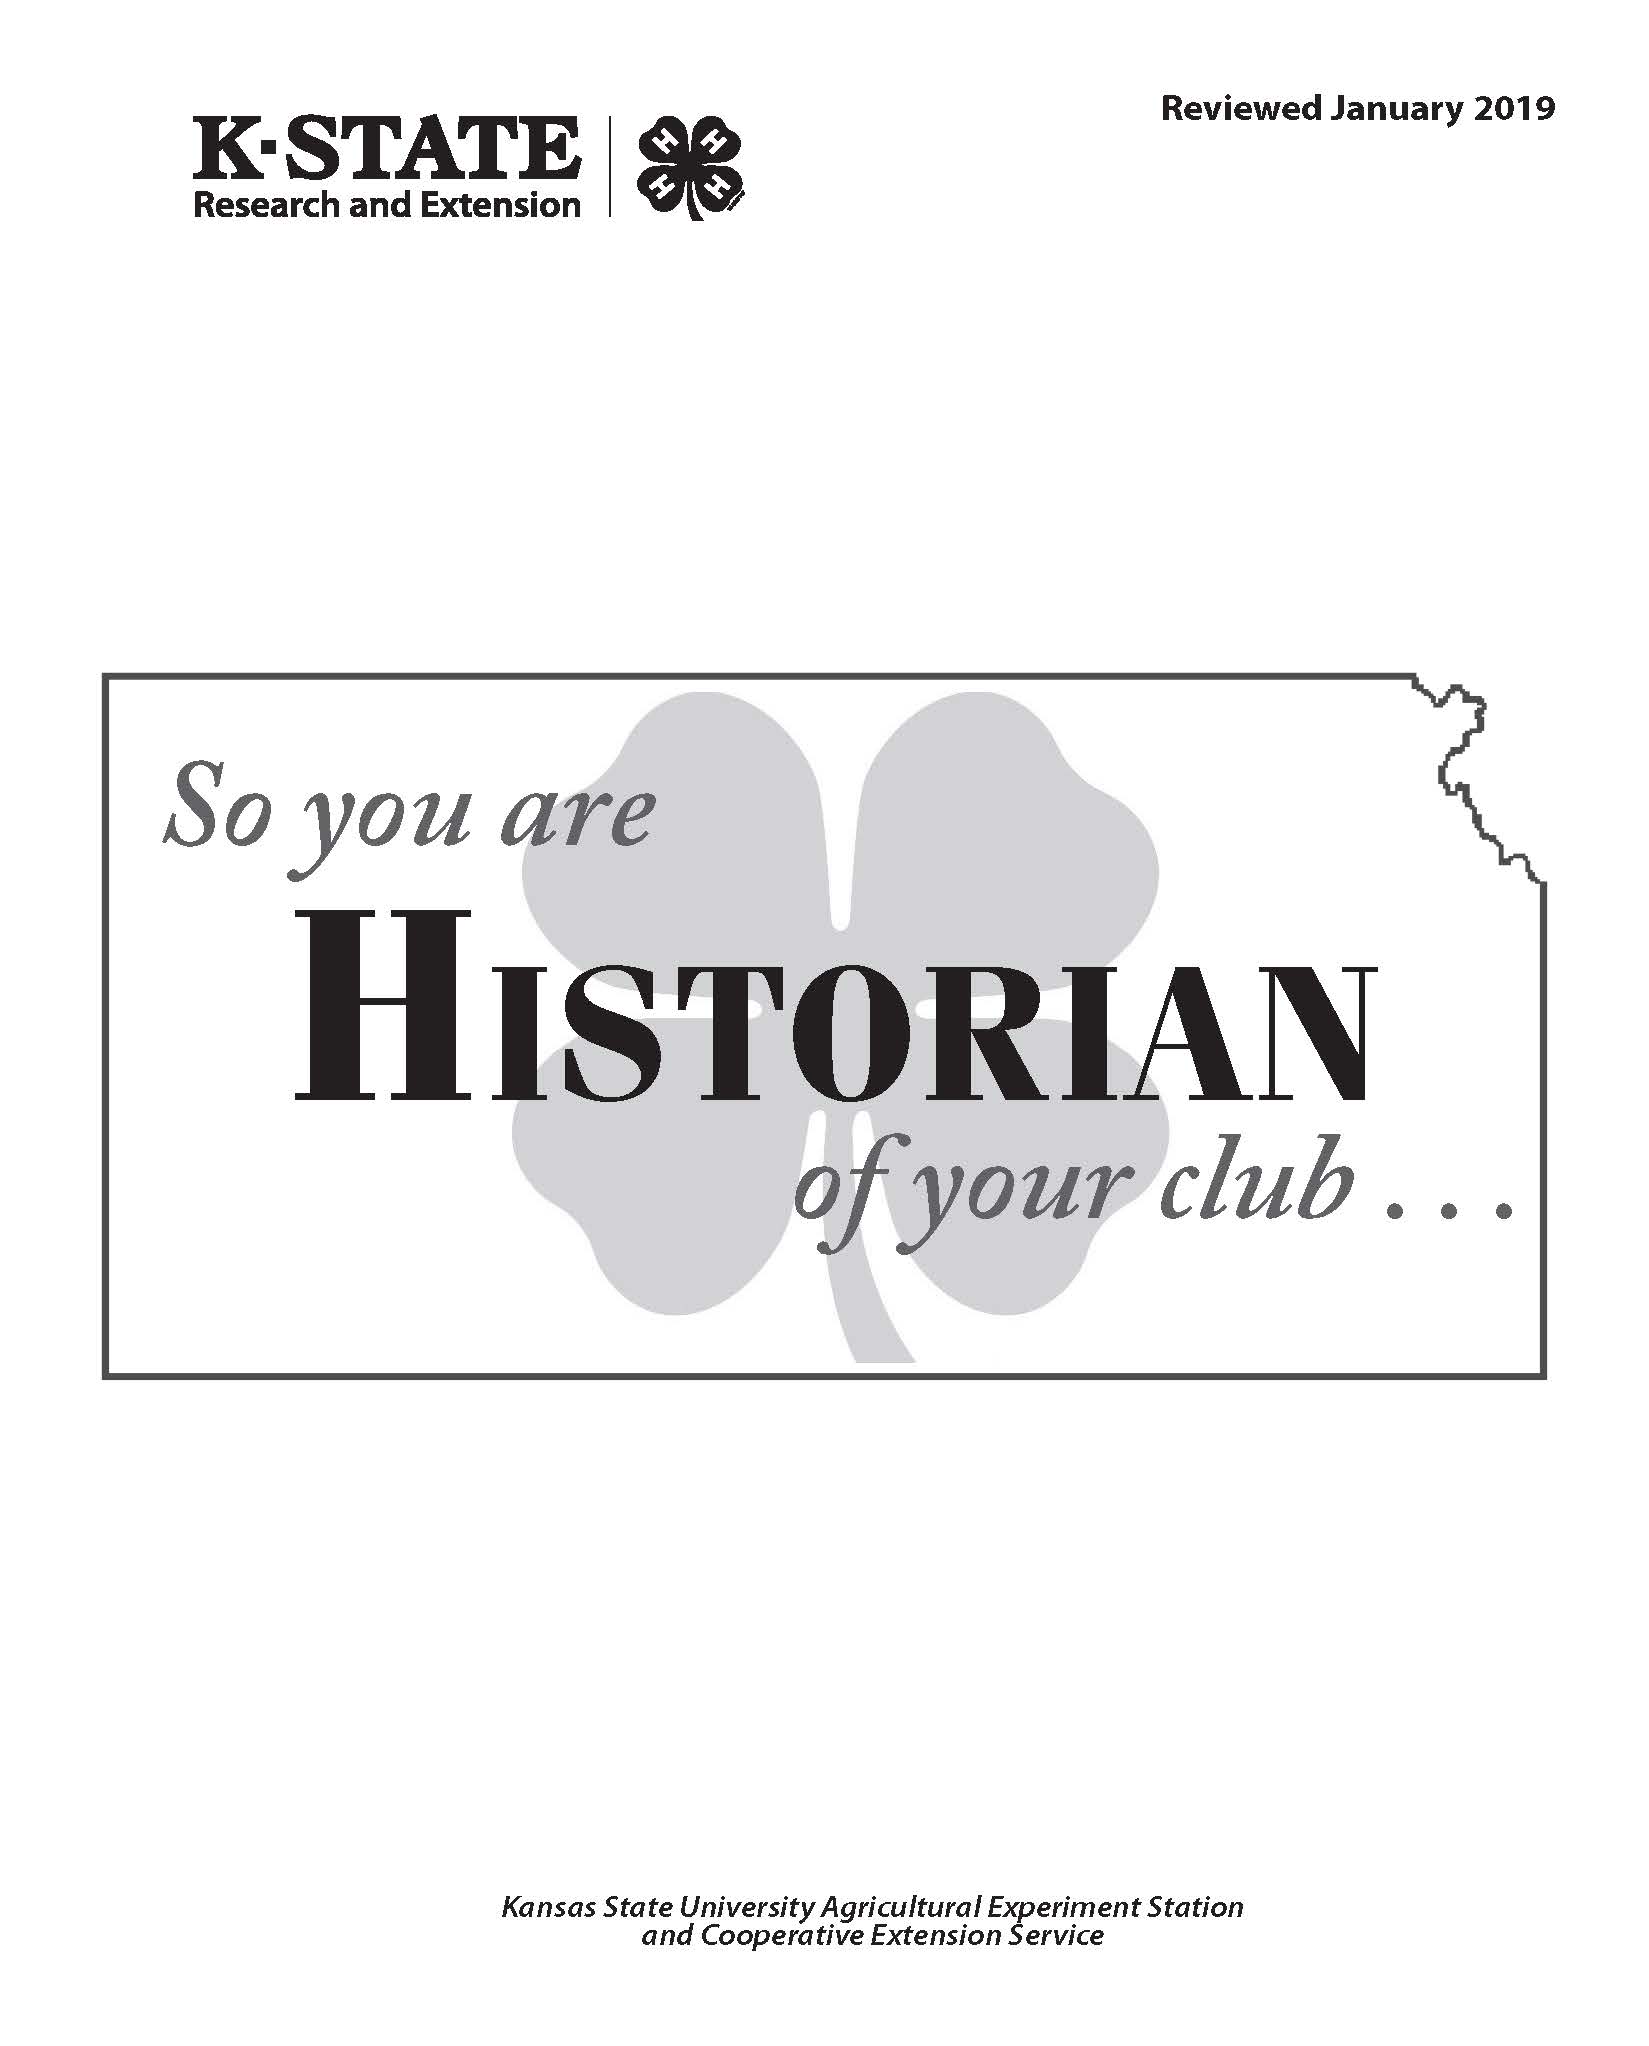 So you are the Historian of your club